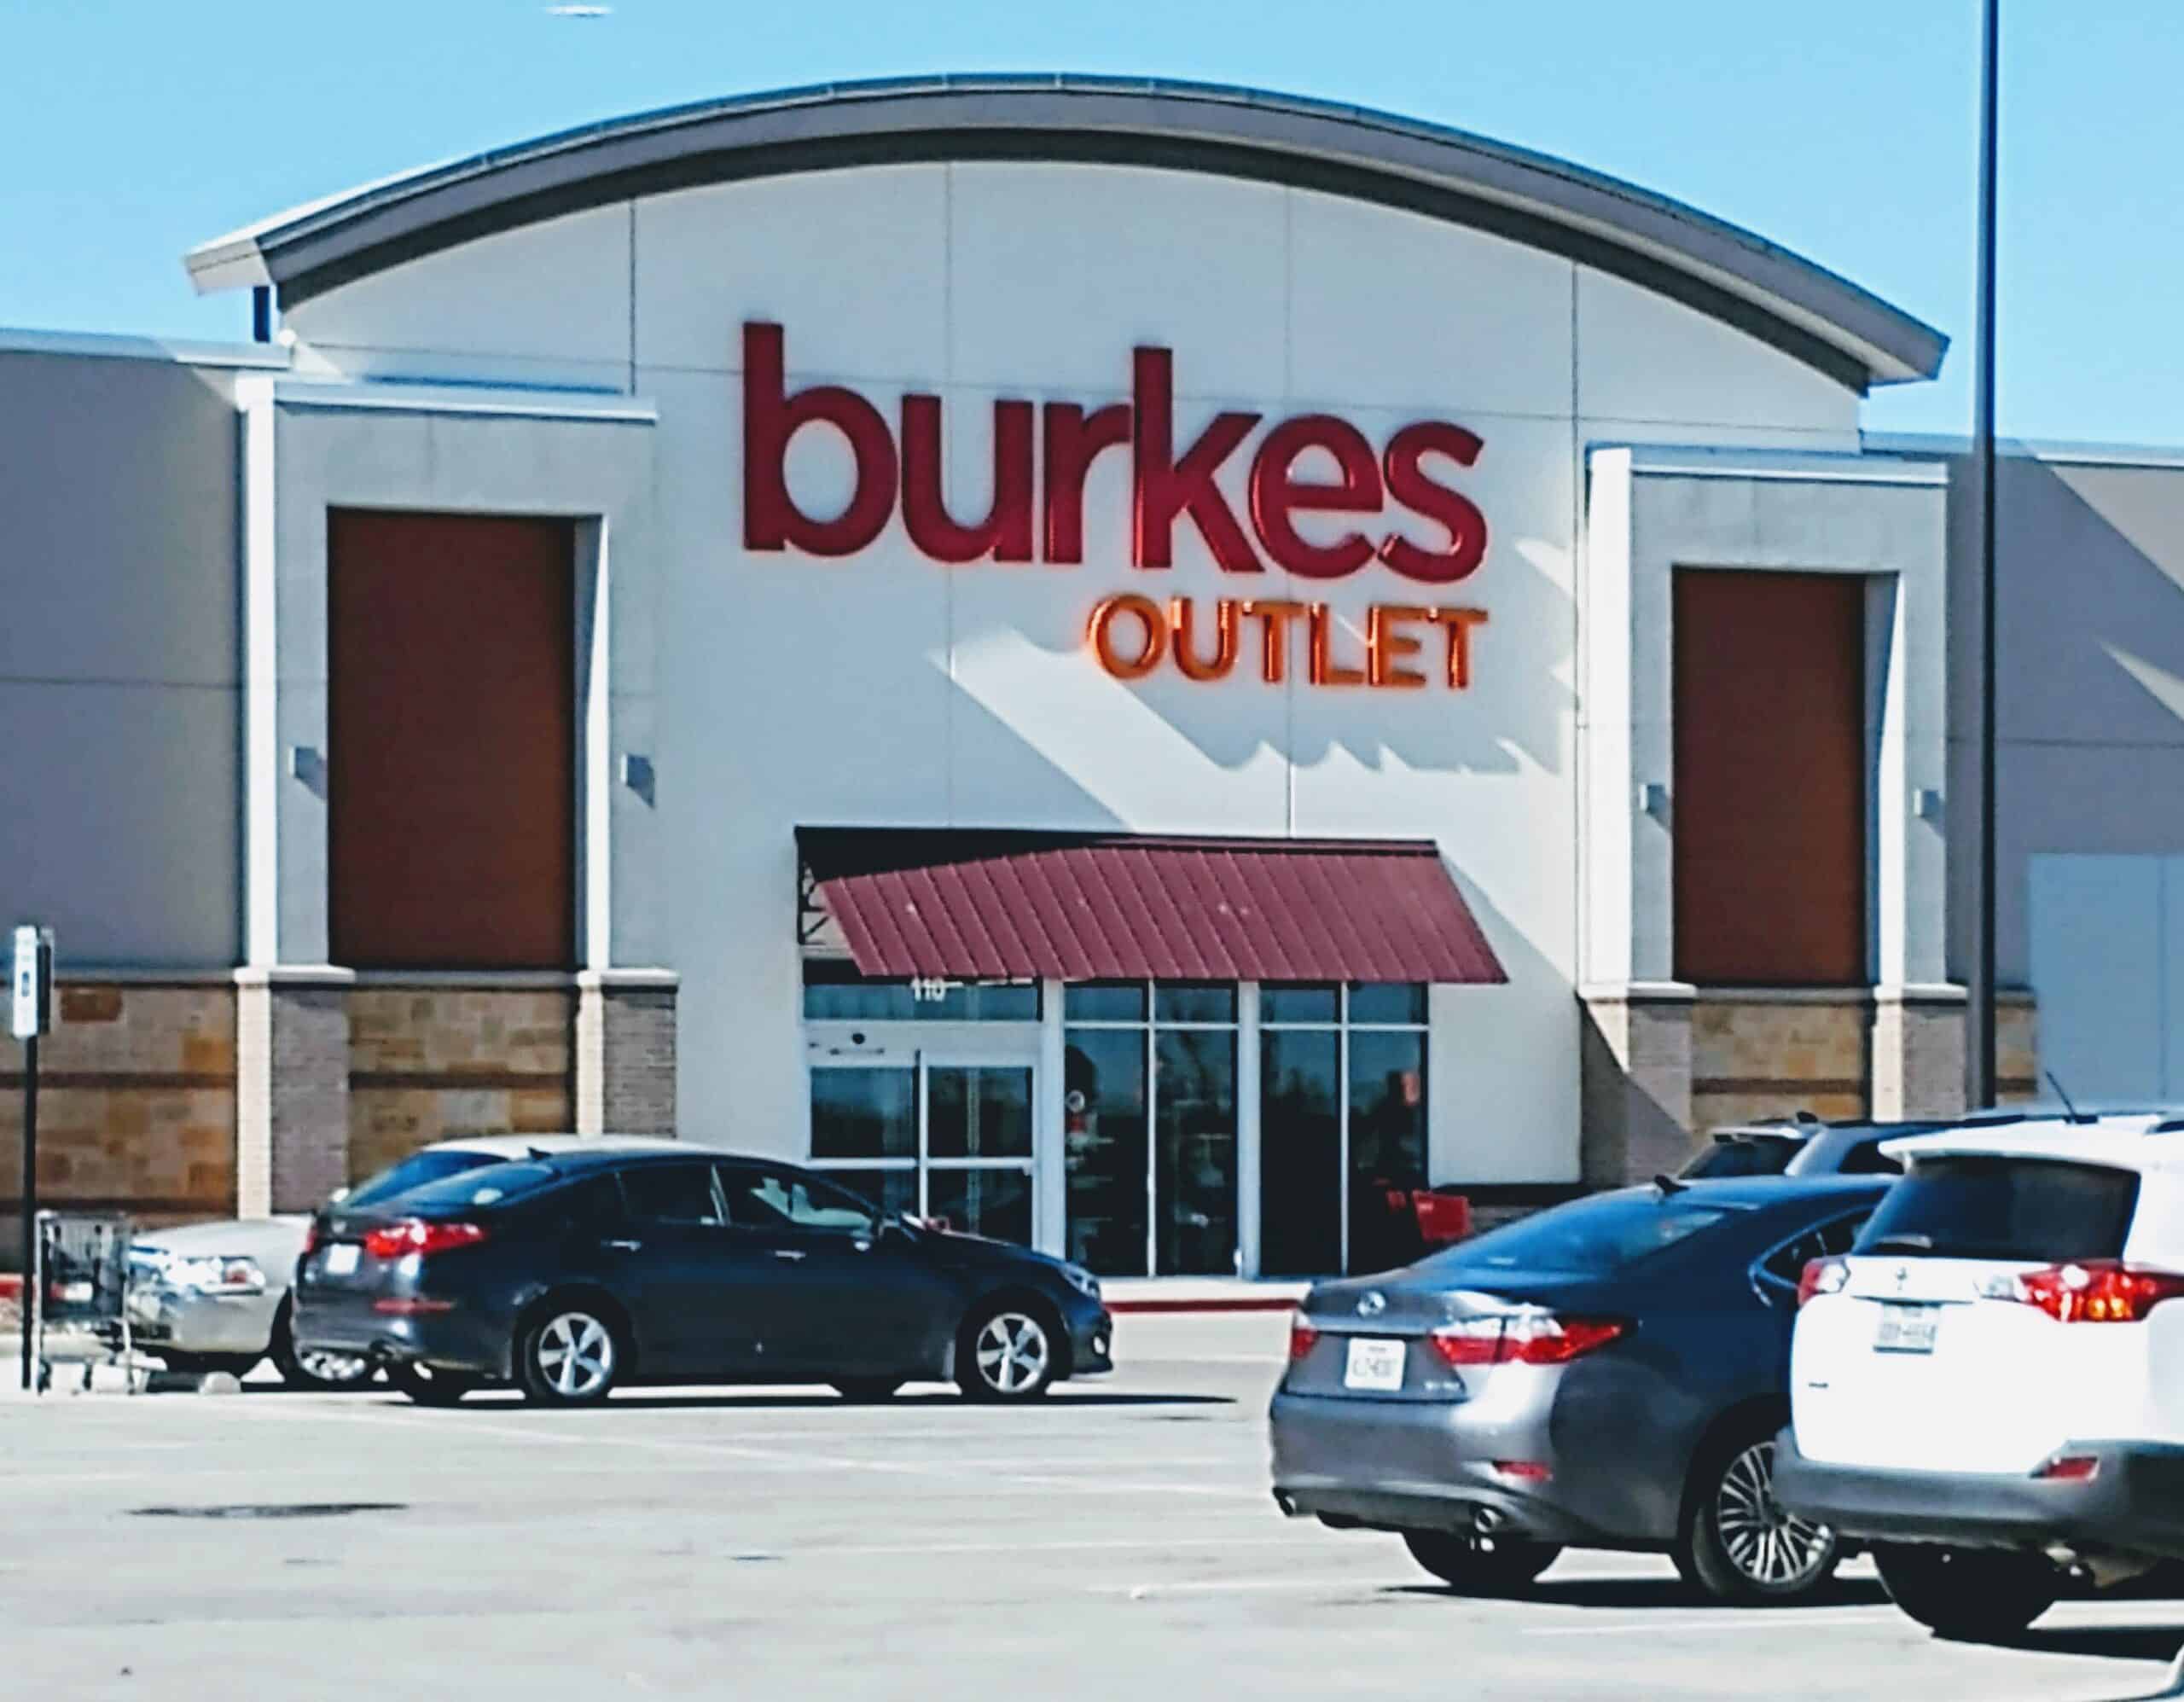 Burkes Outlet Grand Prairie Texas January 2020 by Smarty9108